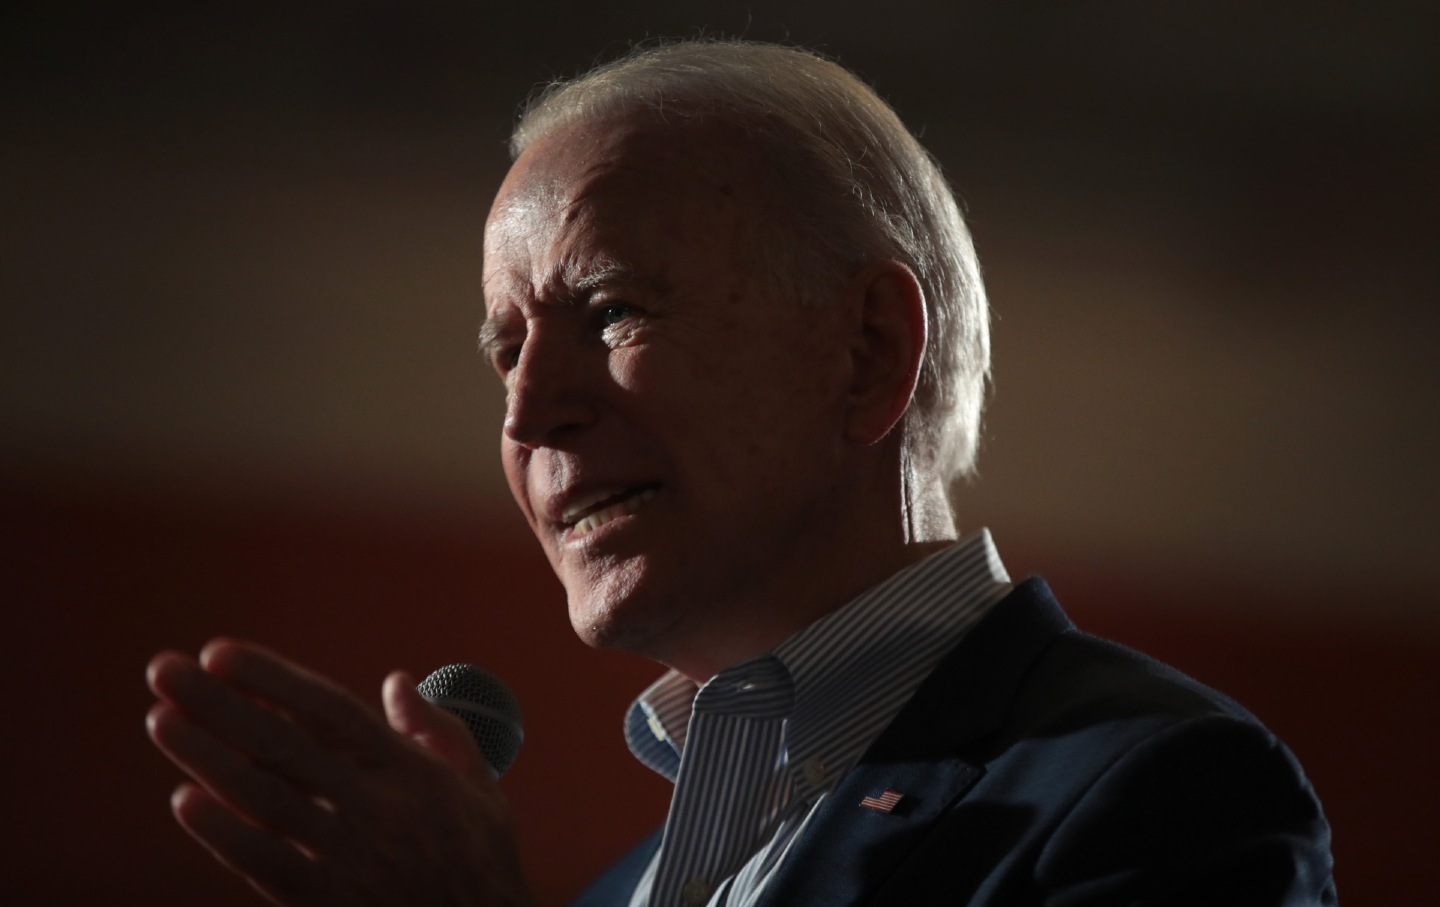 Black Voters Didn’t Vote for Biden in South Carolina Because They ‘Lack Information’